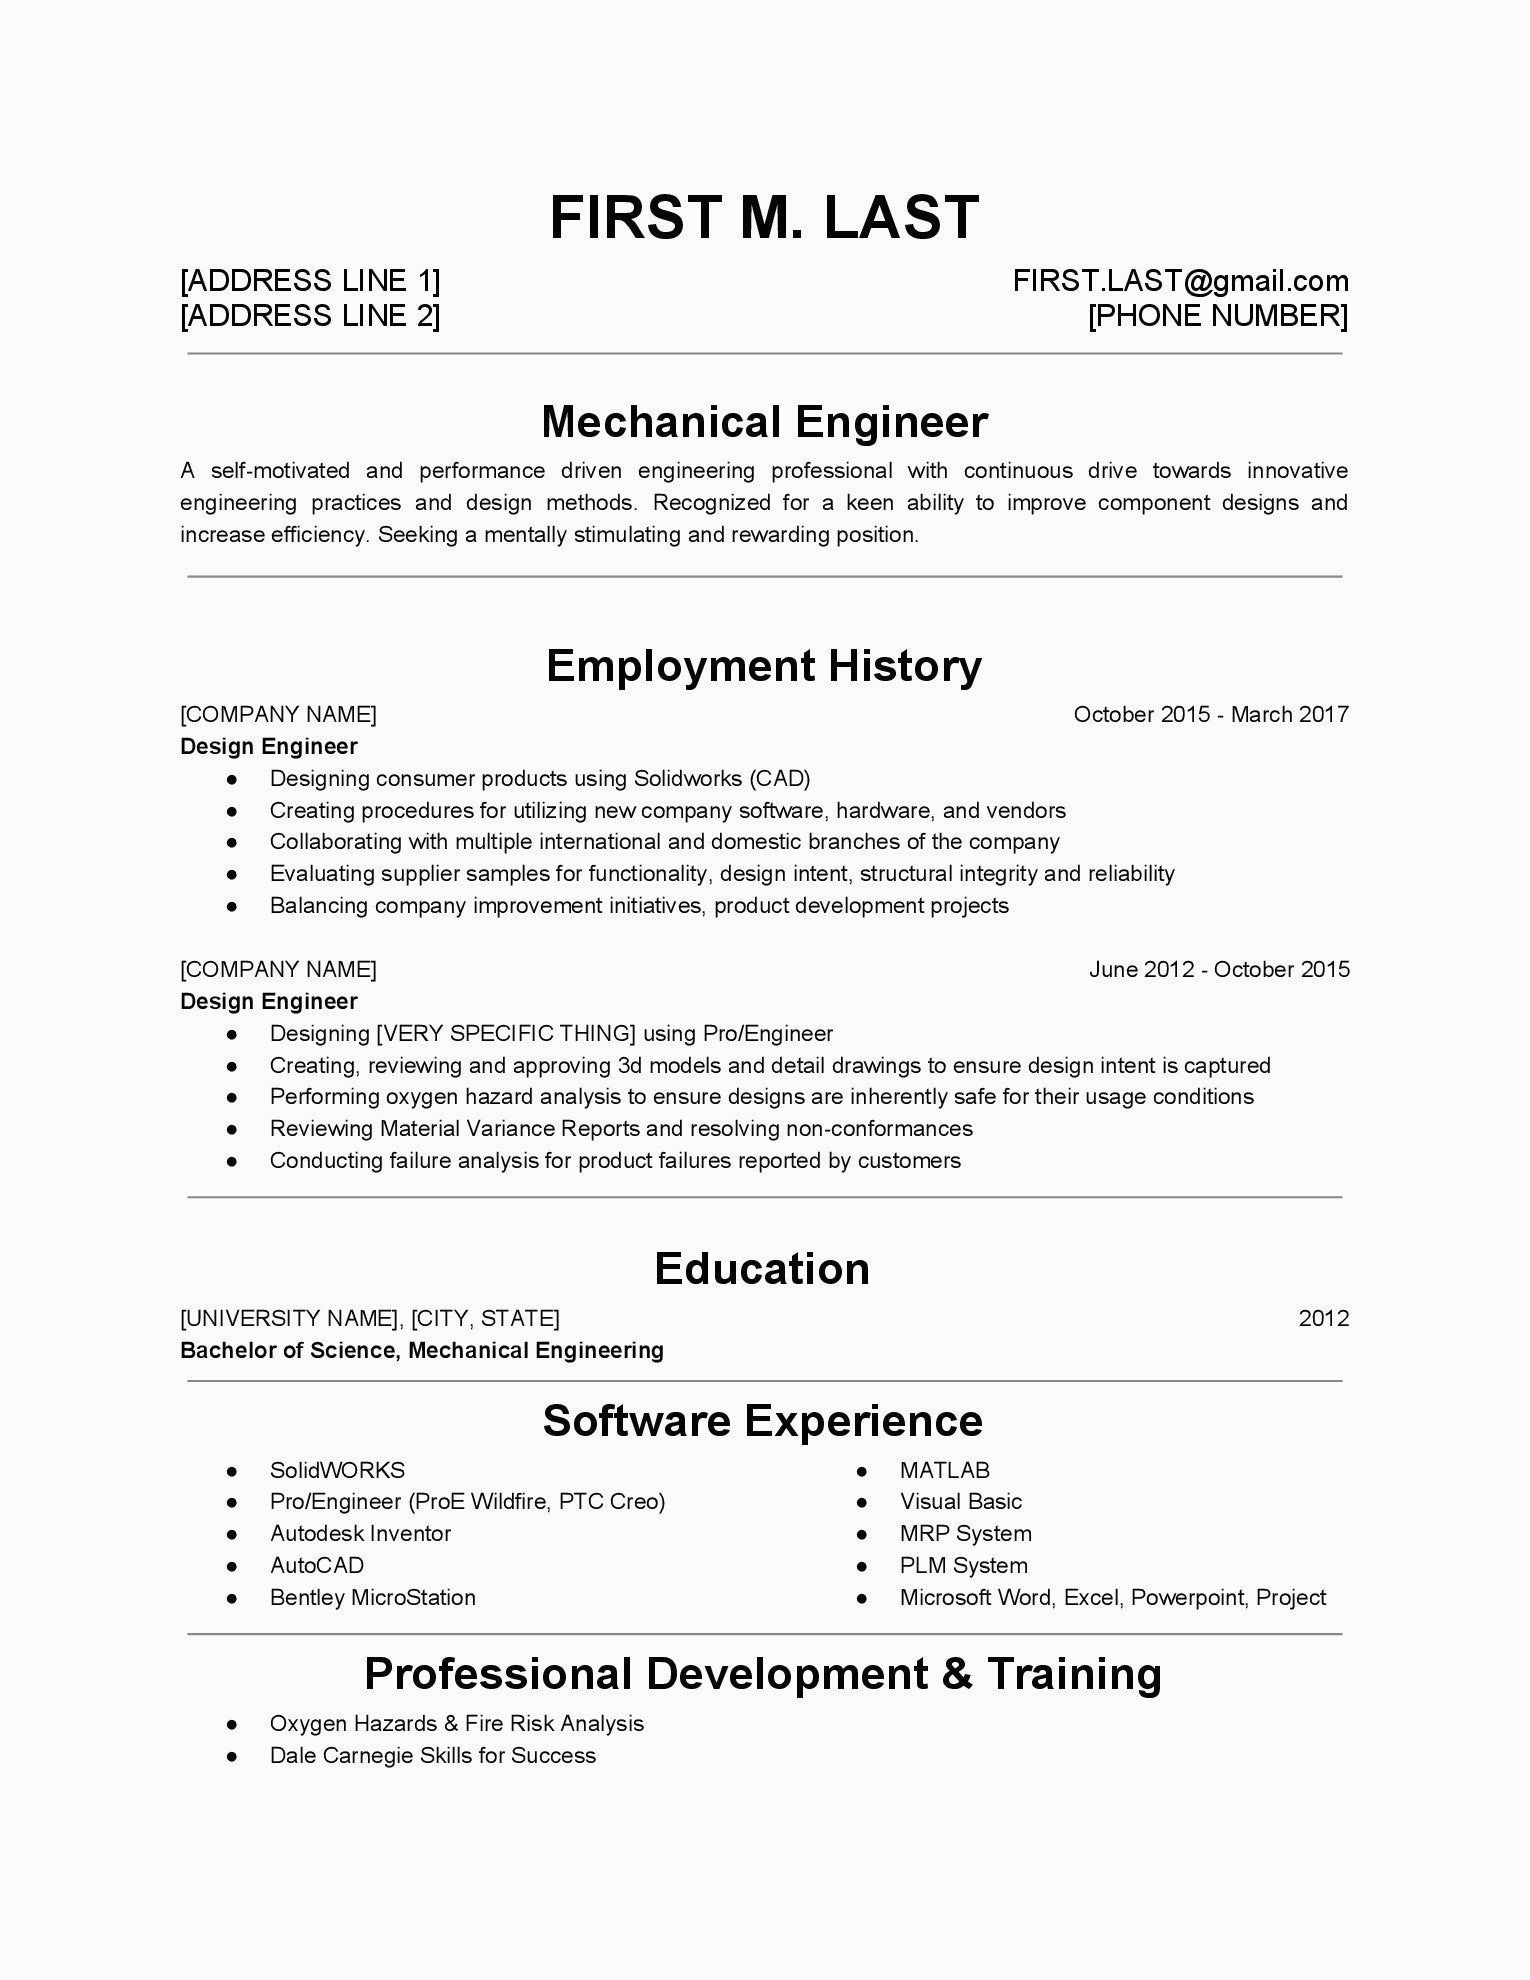 Resume Samples 3 5 Years Experience Mechanical Engineer with 3 5 Years Experience 27 M Resume